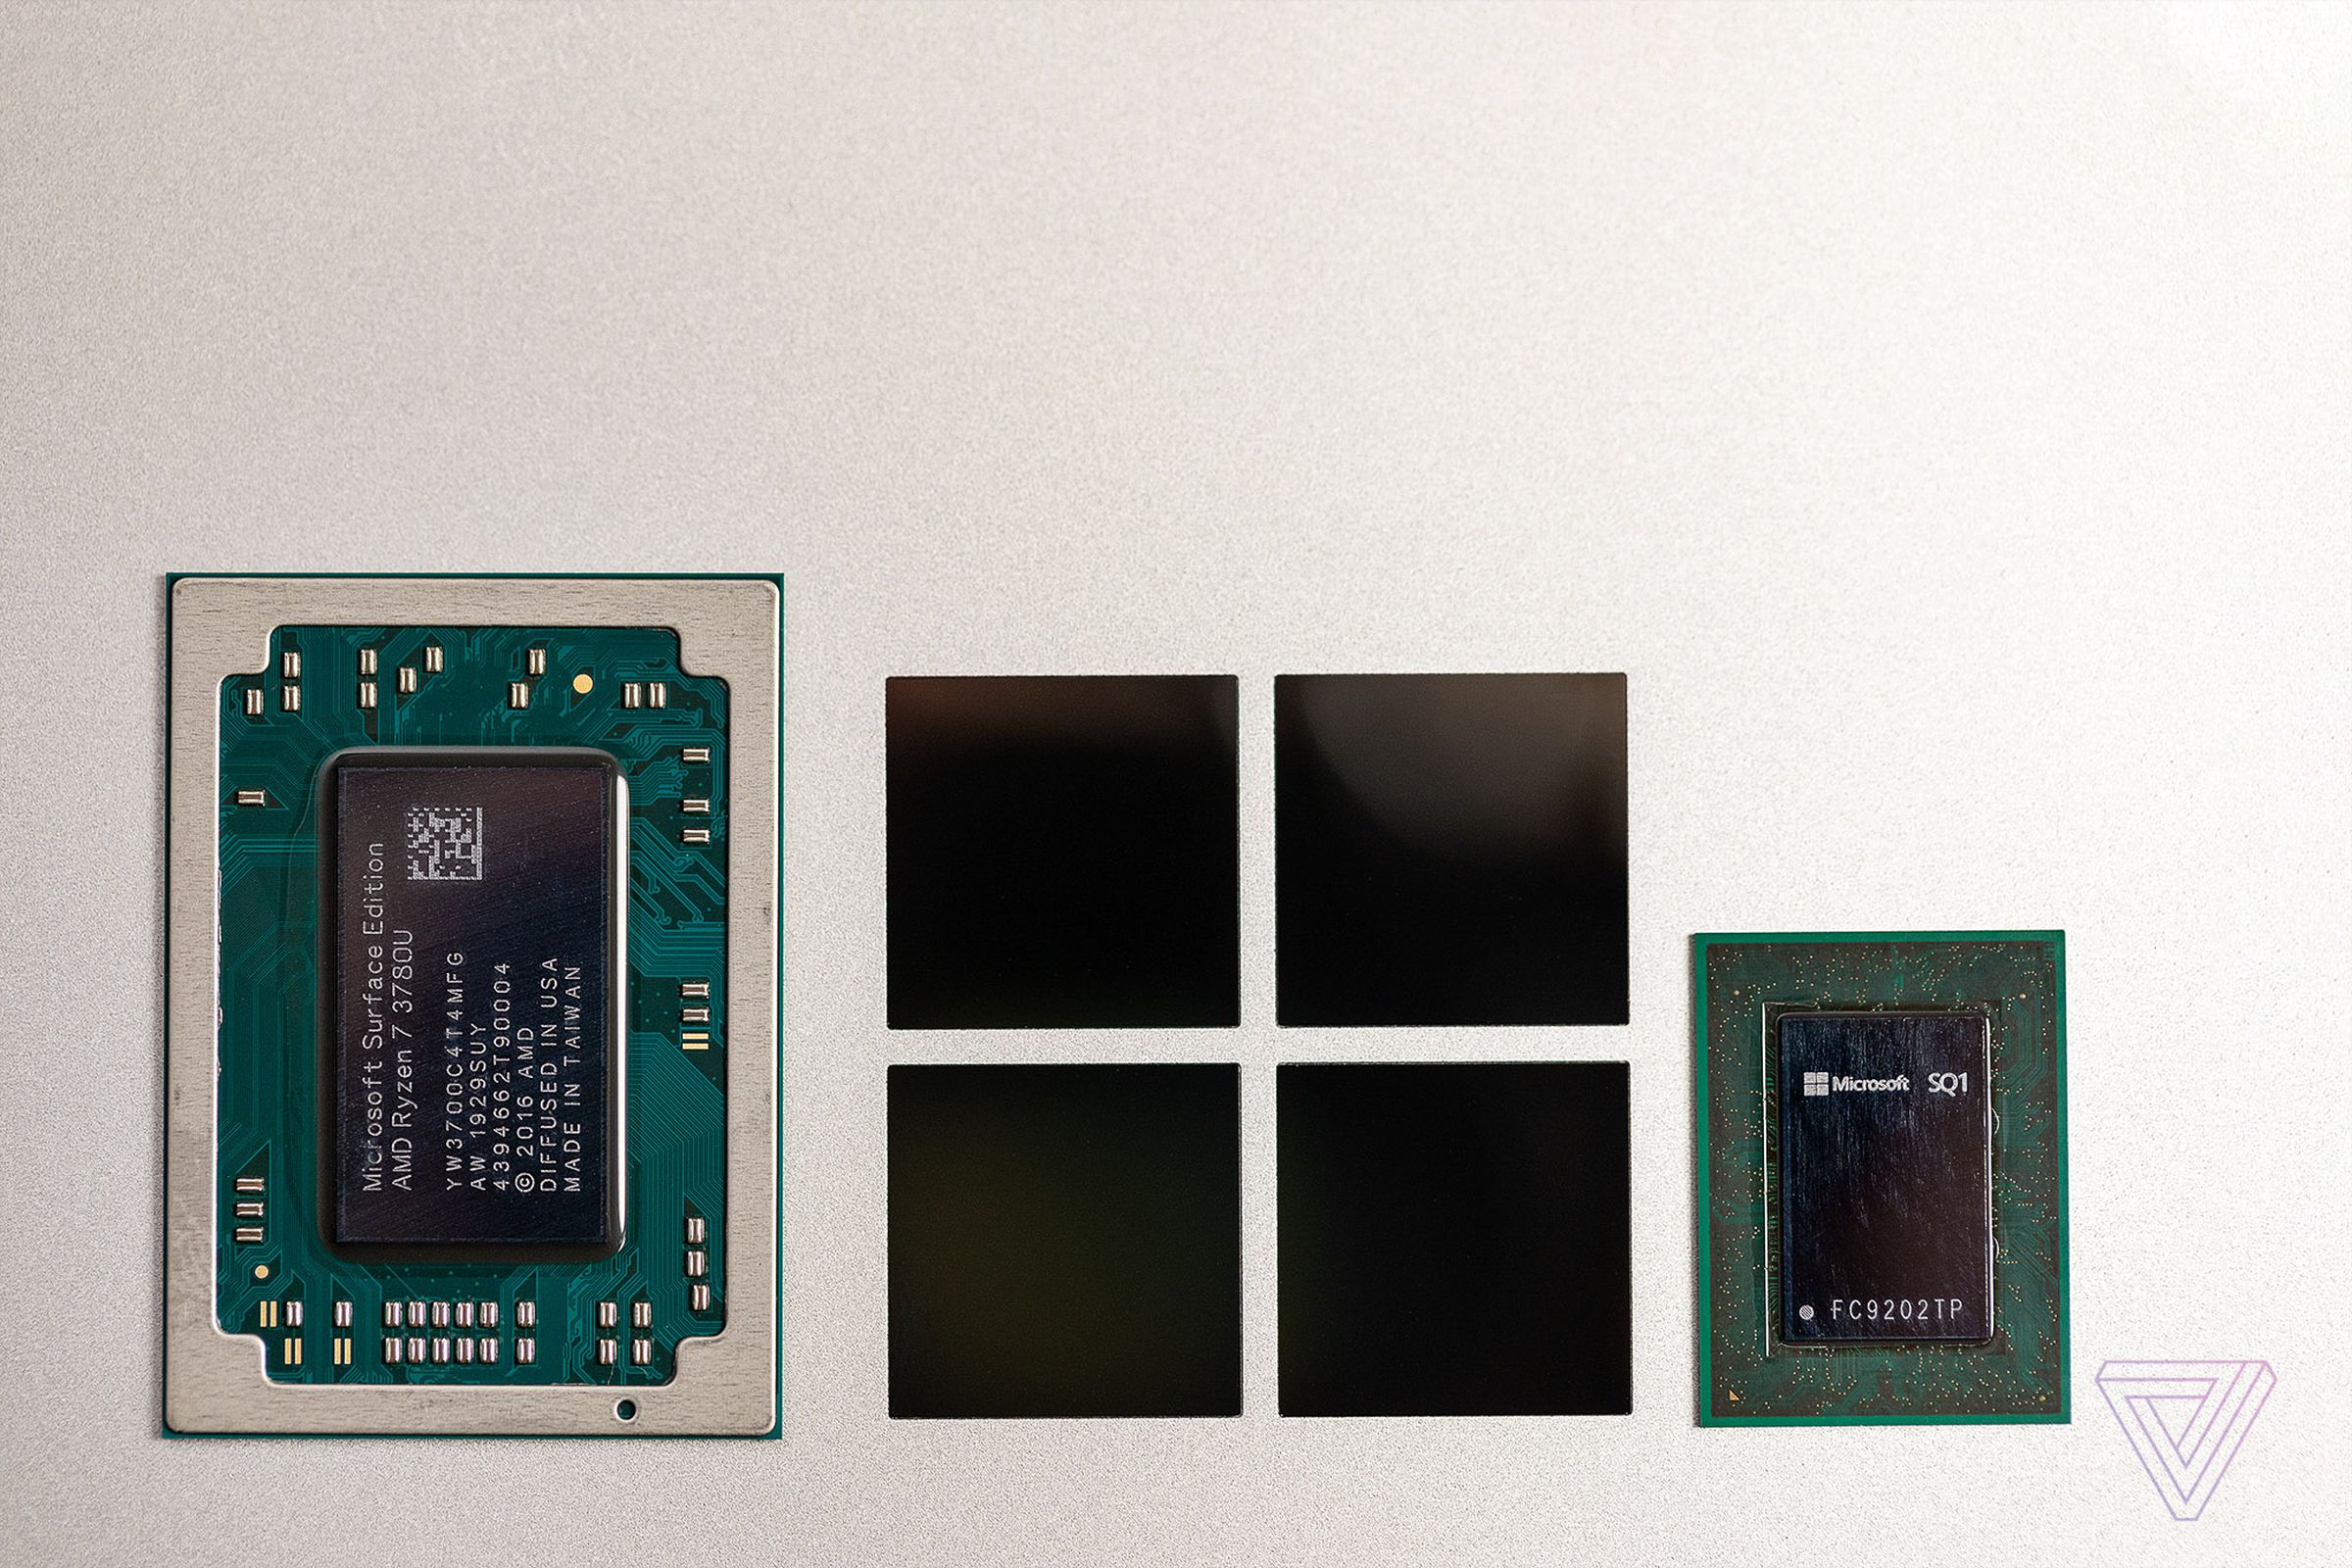 Microsoft’s custom chips for Surface devices.